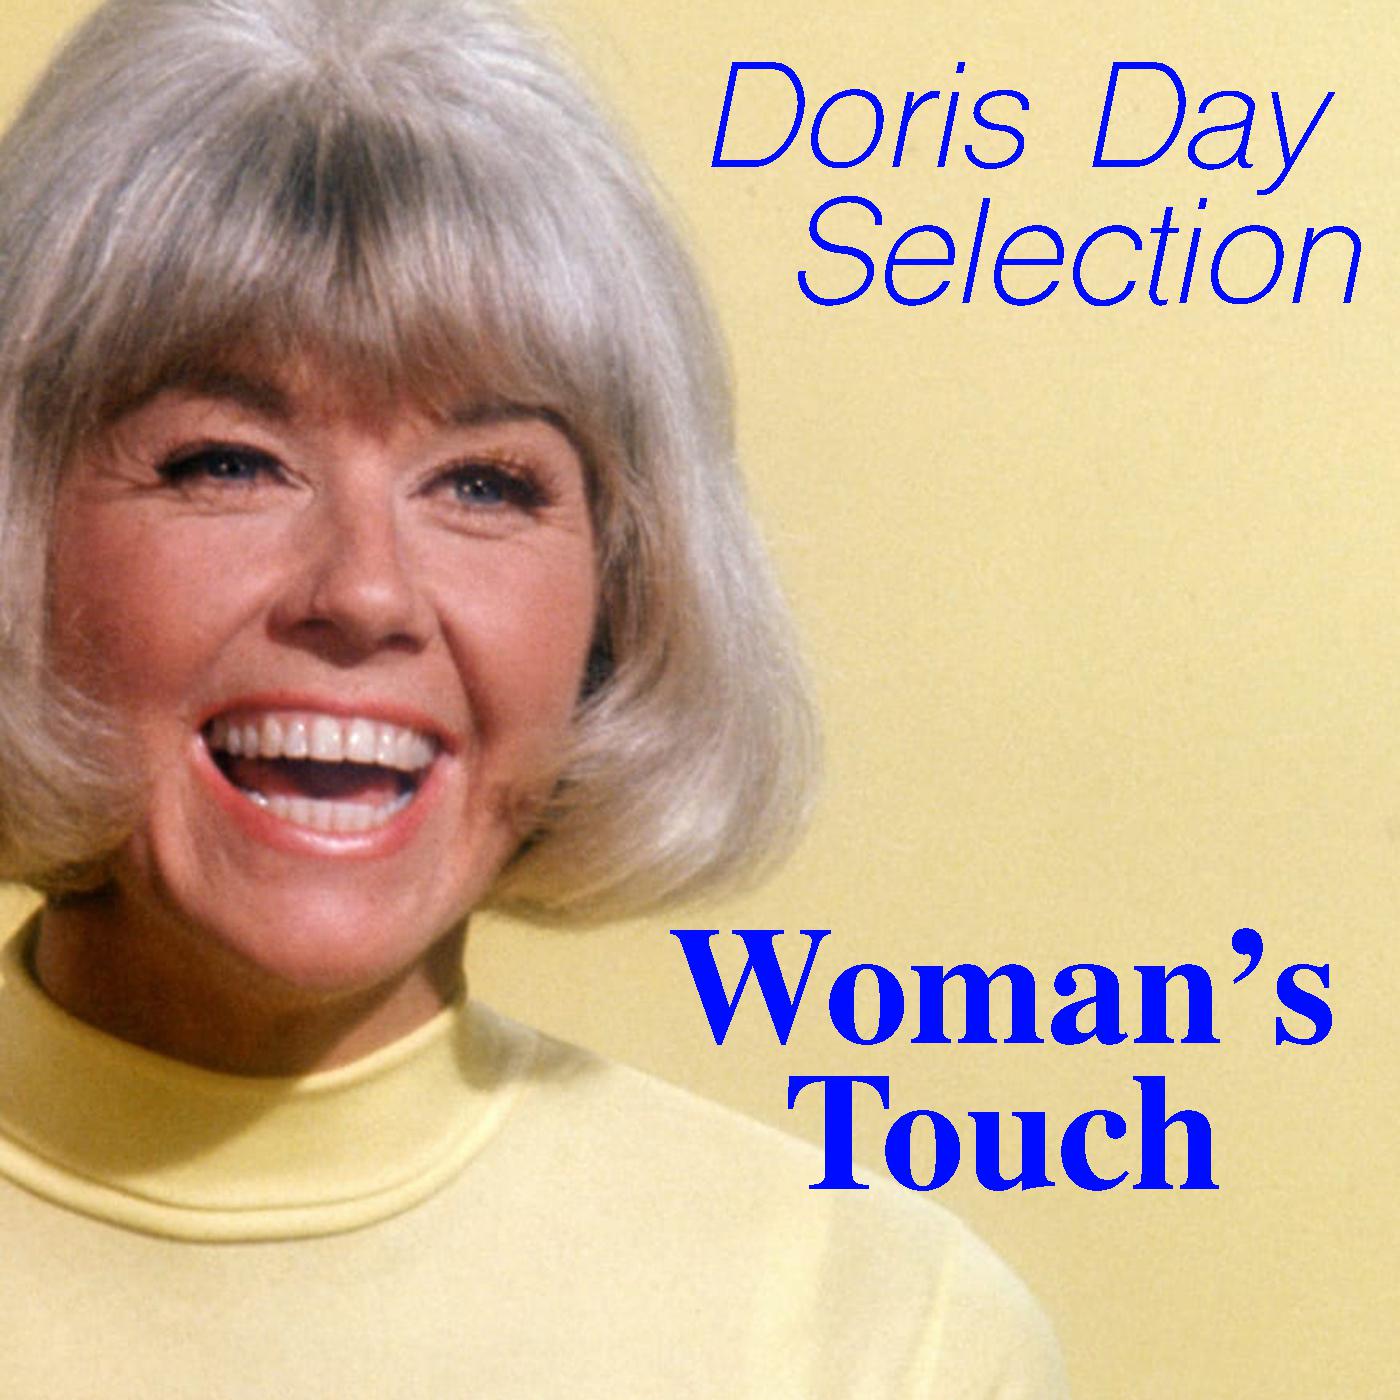 Woman's Touch Doris Day Selection